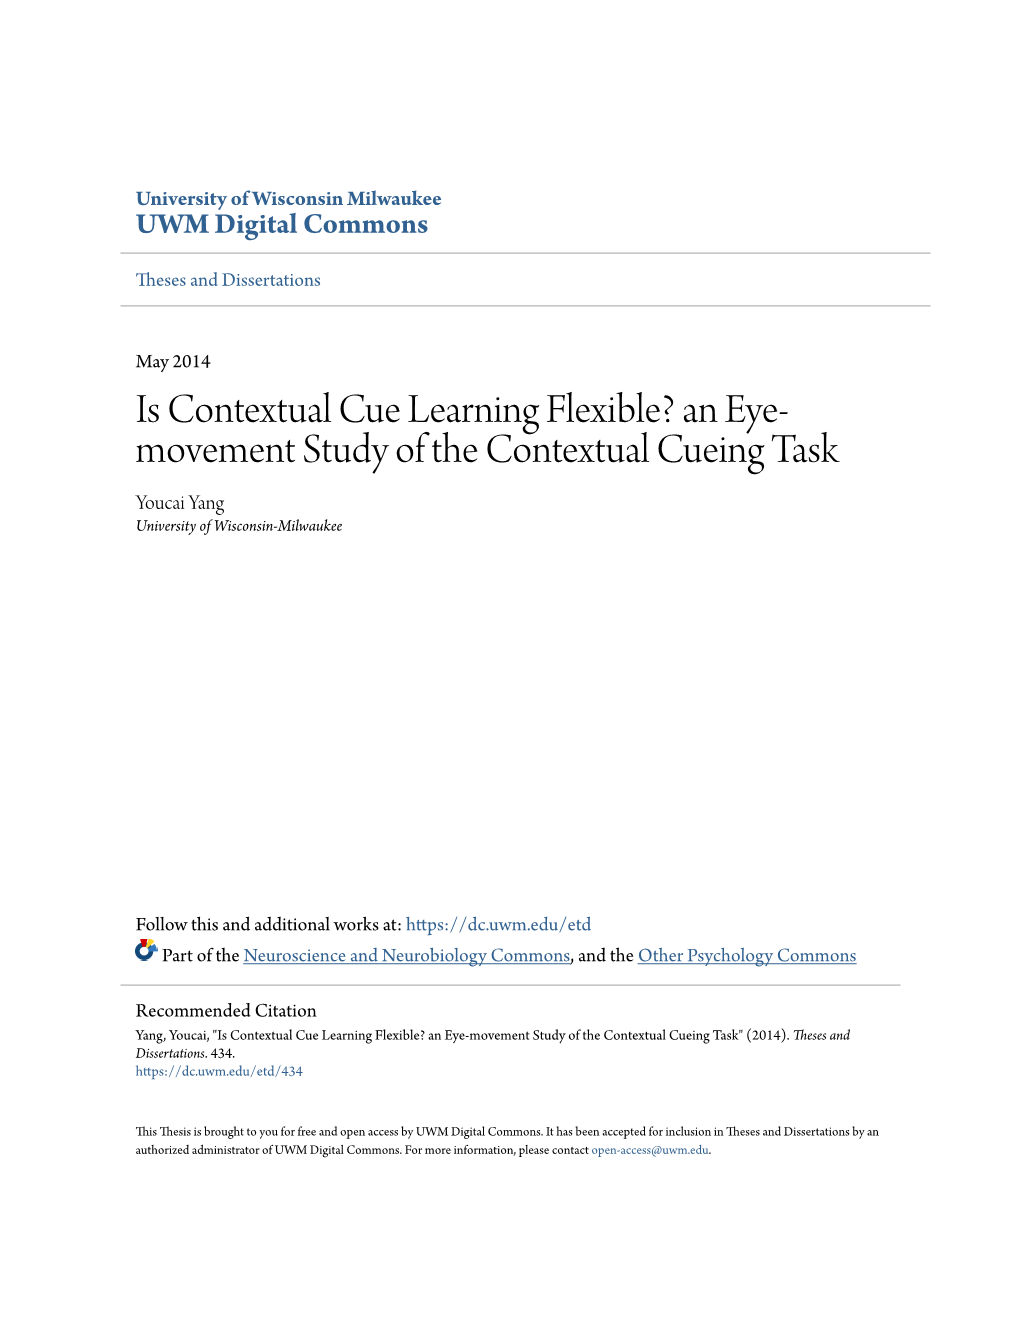 Is Contextual Cue Learning Flexible? an Eye- Movement Study of the Contextual Cueing Task Youcai Yang University of Wisconsin-Milwaukee